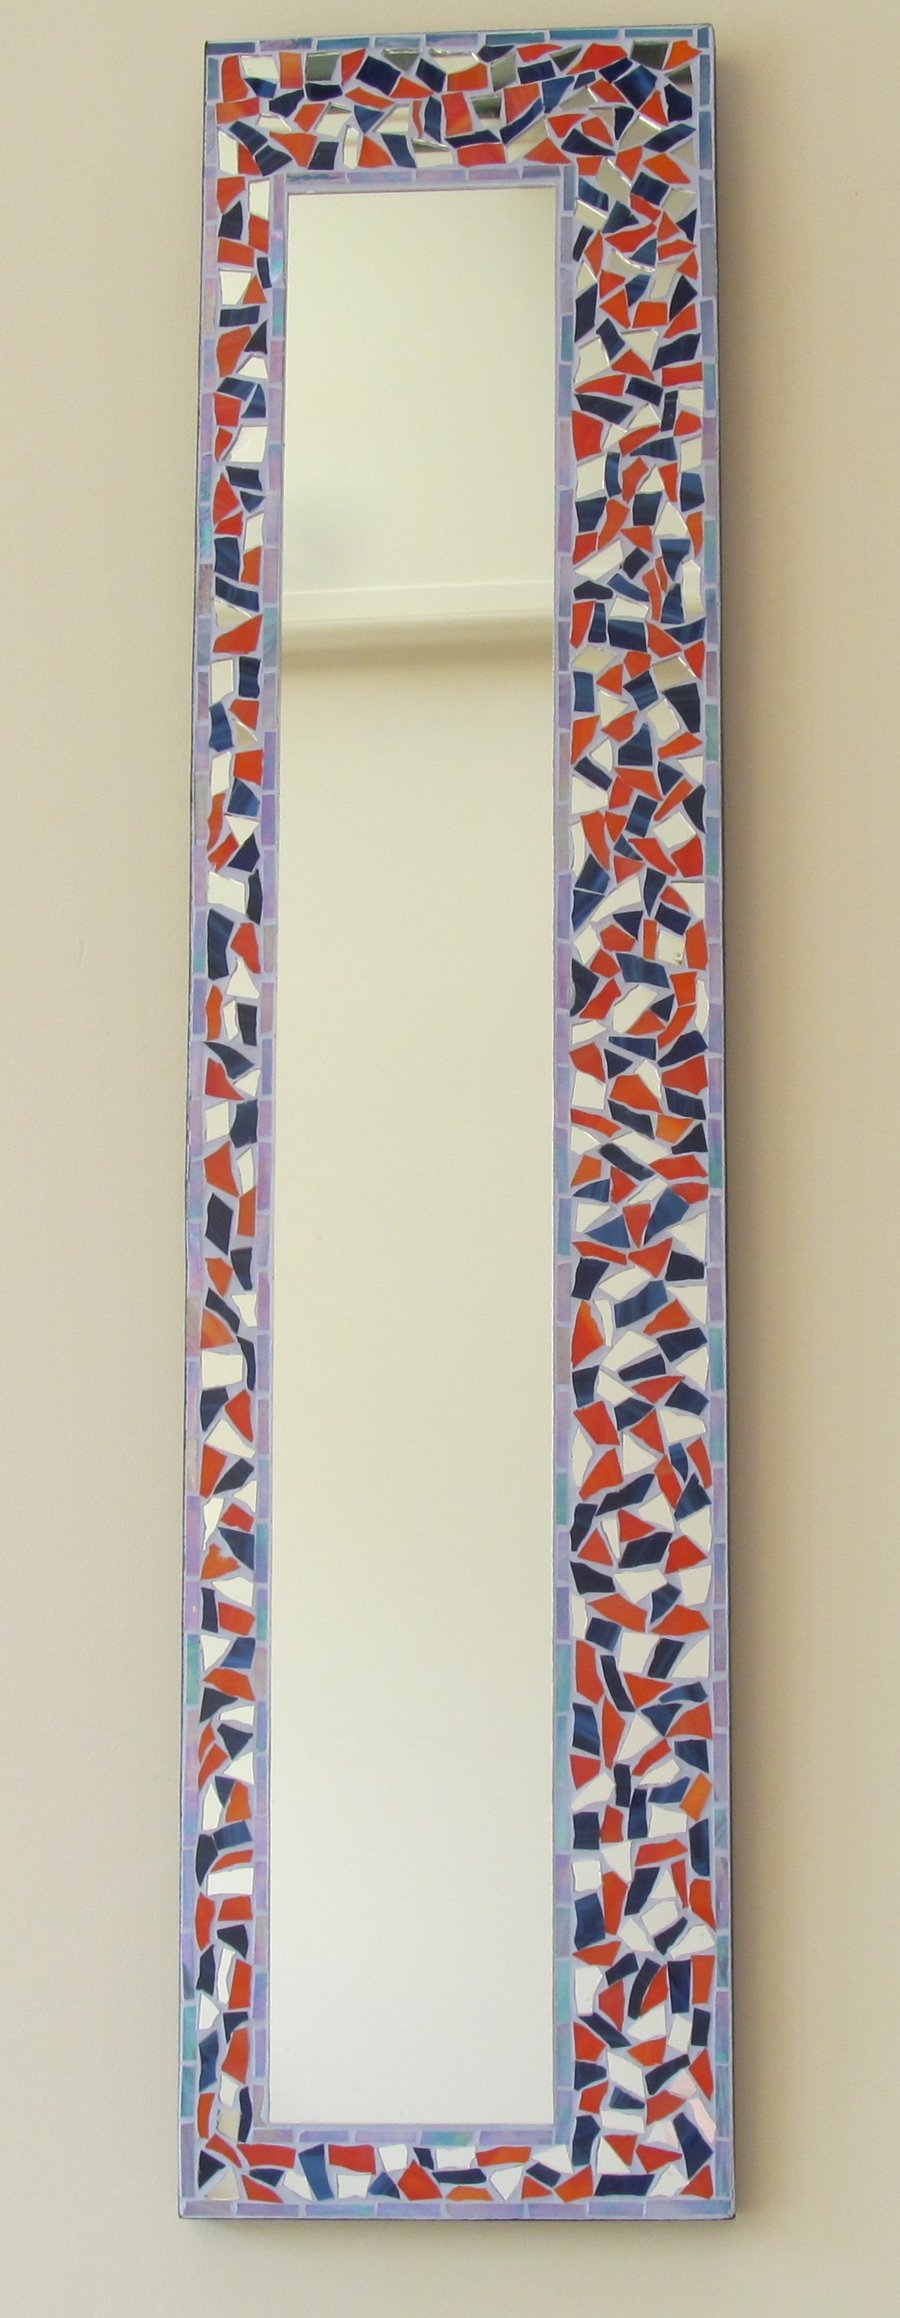 Handmade Stained glass Mosaic mirror.FREE UK MAINLAND DELIVERY